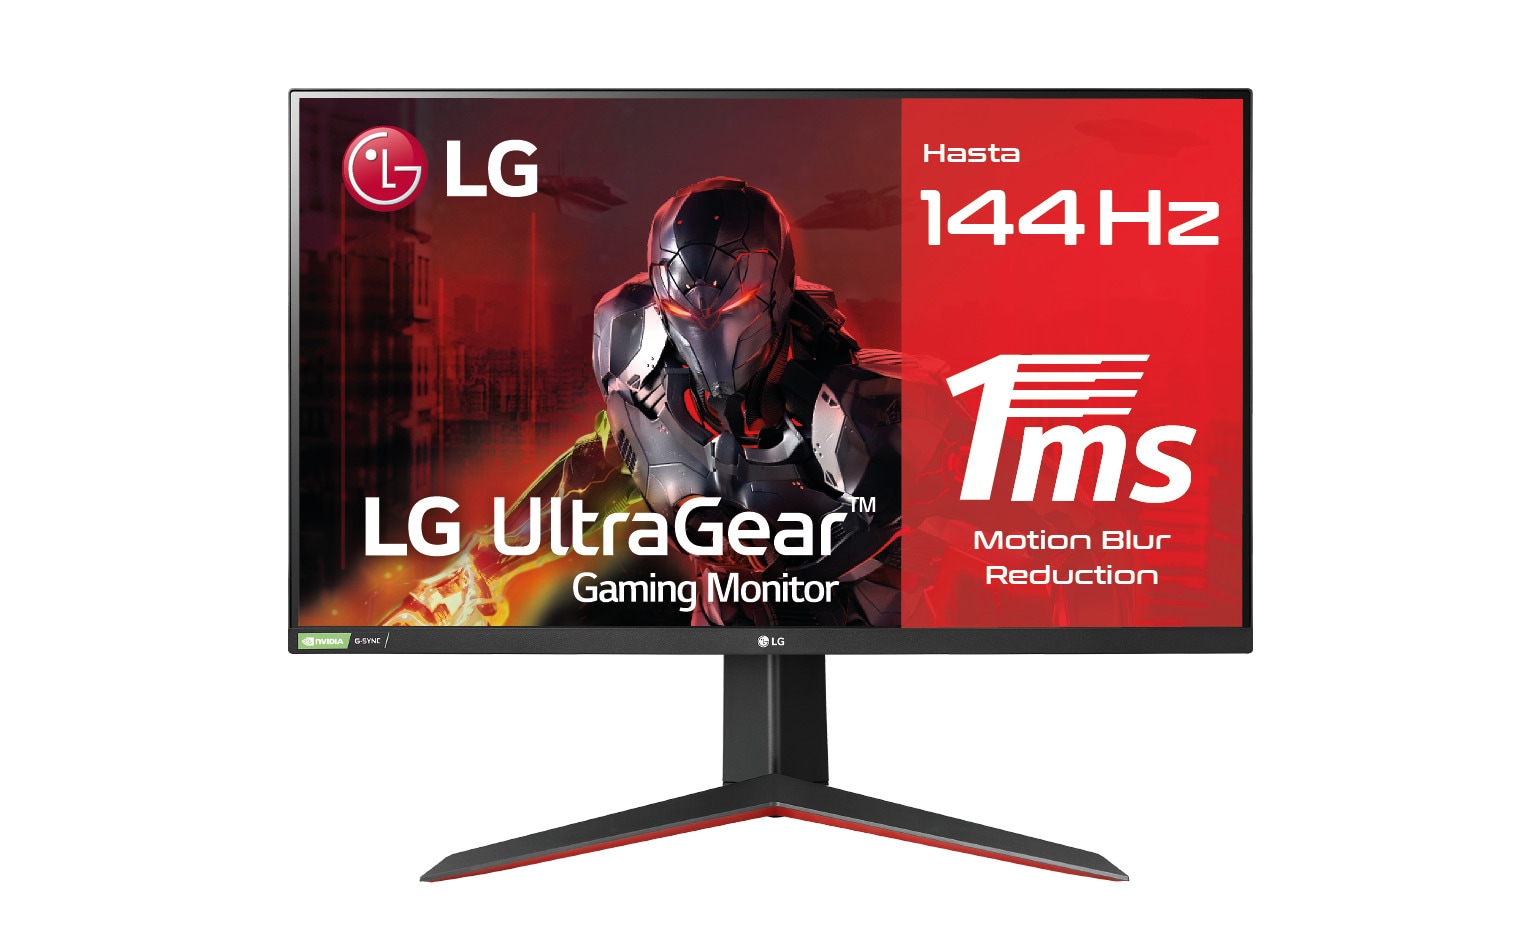 LG 27GN850-B -Monitor Gaming LG UltraGear (Panel IPS: 2560x1440p, 16:9, 400 cd/m², 1000:1, 144Hz, 1ms); DPx1, HDMIx2; G-Sync Compatible; Regulable en altura e inclinacion y pivotable, G1